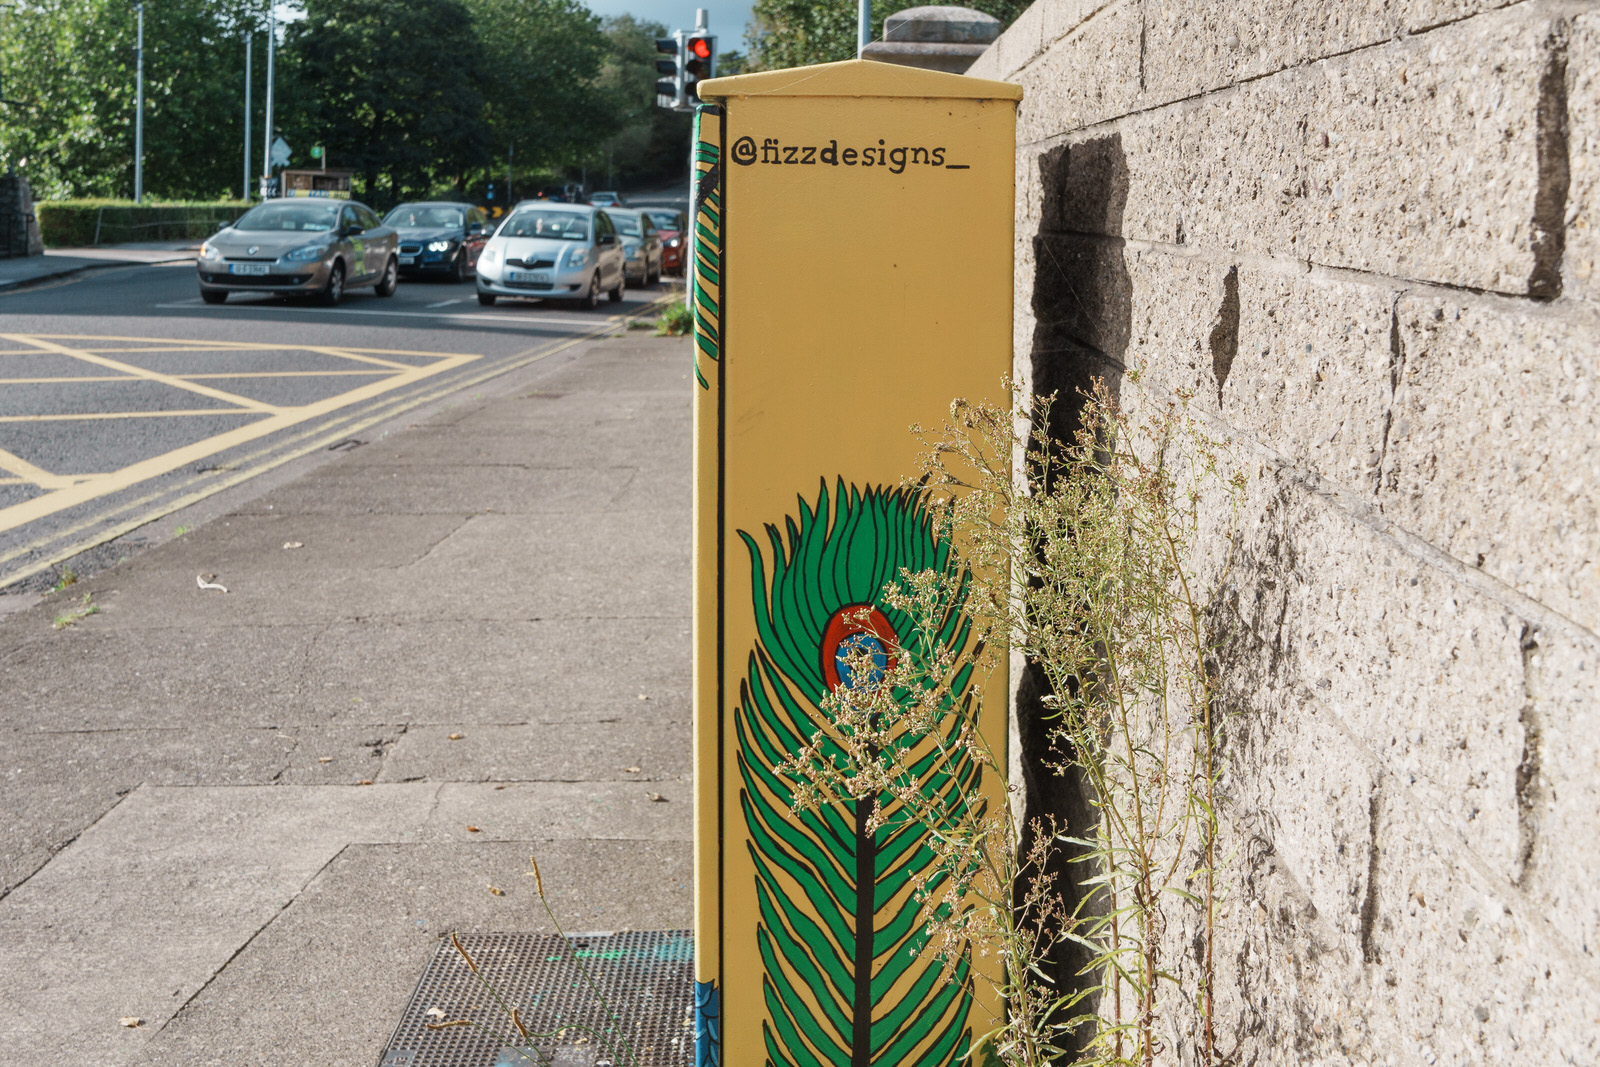 PEACOCK BY CONOR FITZPATRICK @FIZZDESIGNS [PAINT-A-BOX STREET ART IN MILLTOWN] 004